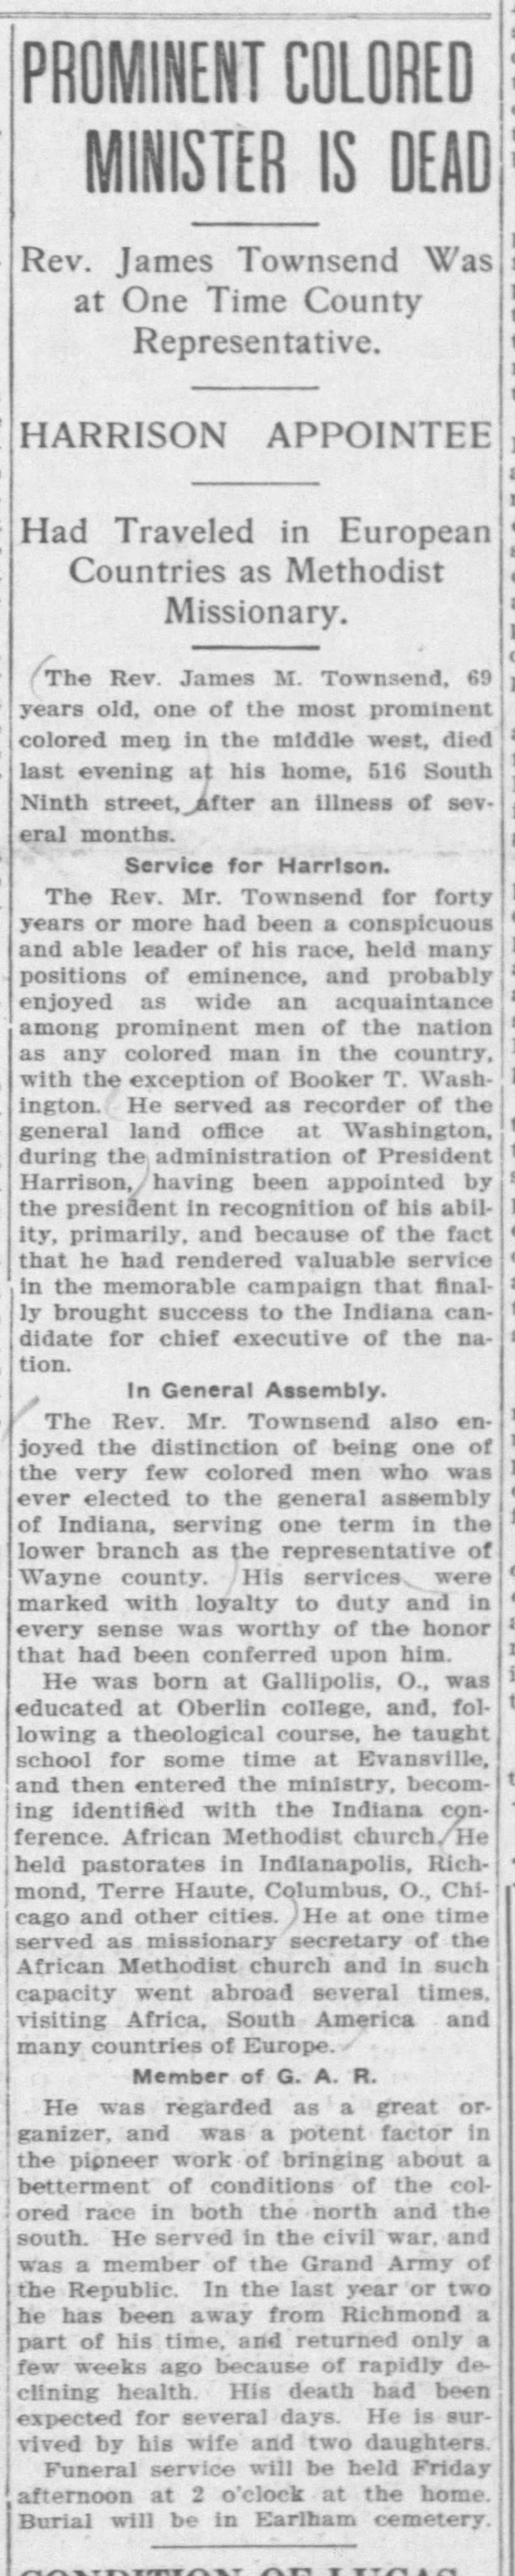 Prominent Colored Minister is Dead, Palladium-Item (Richmond, Indiana) June 18, 1913, page 1